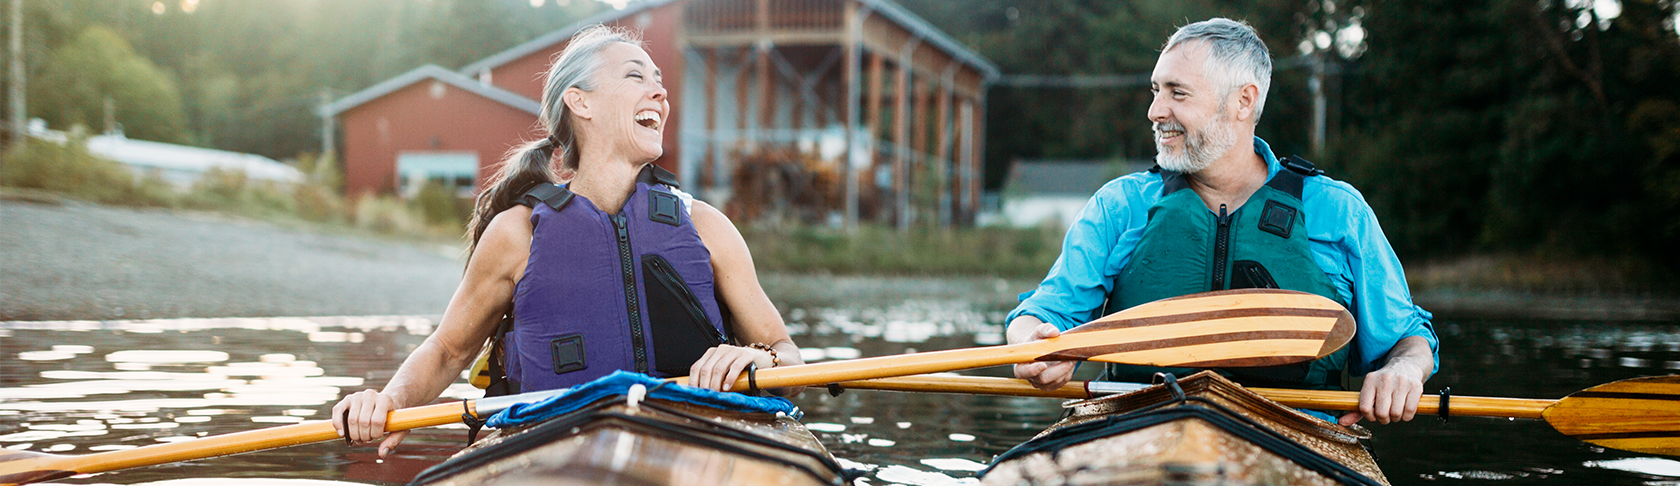 A couple at the retirement age is sitting in canoes and smiling at each other.  